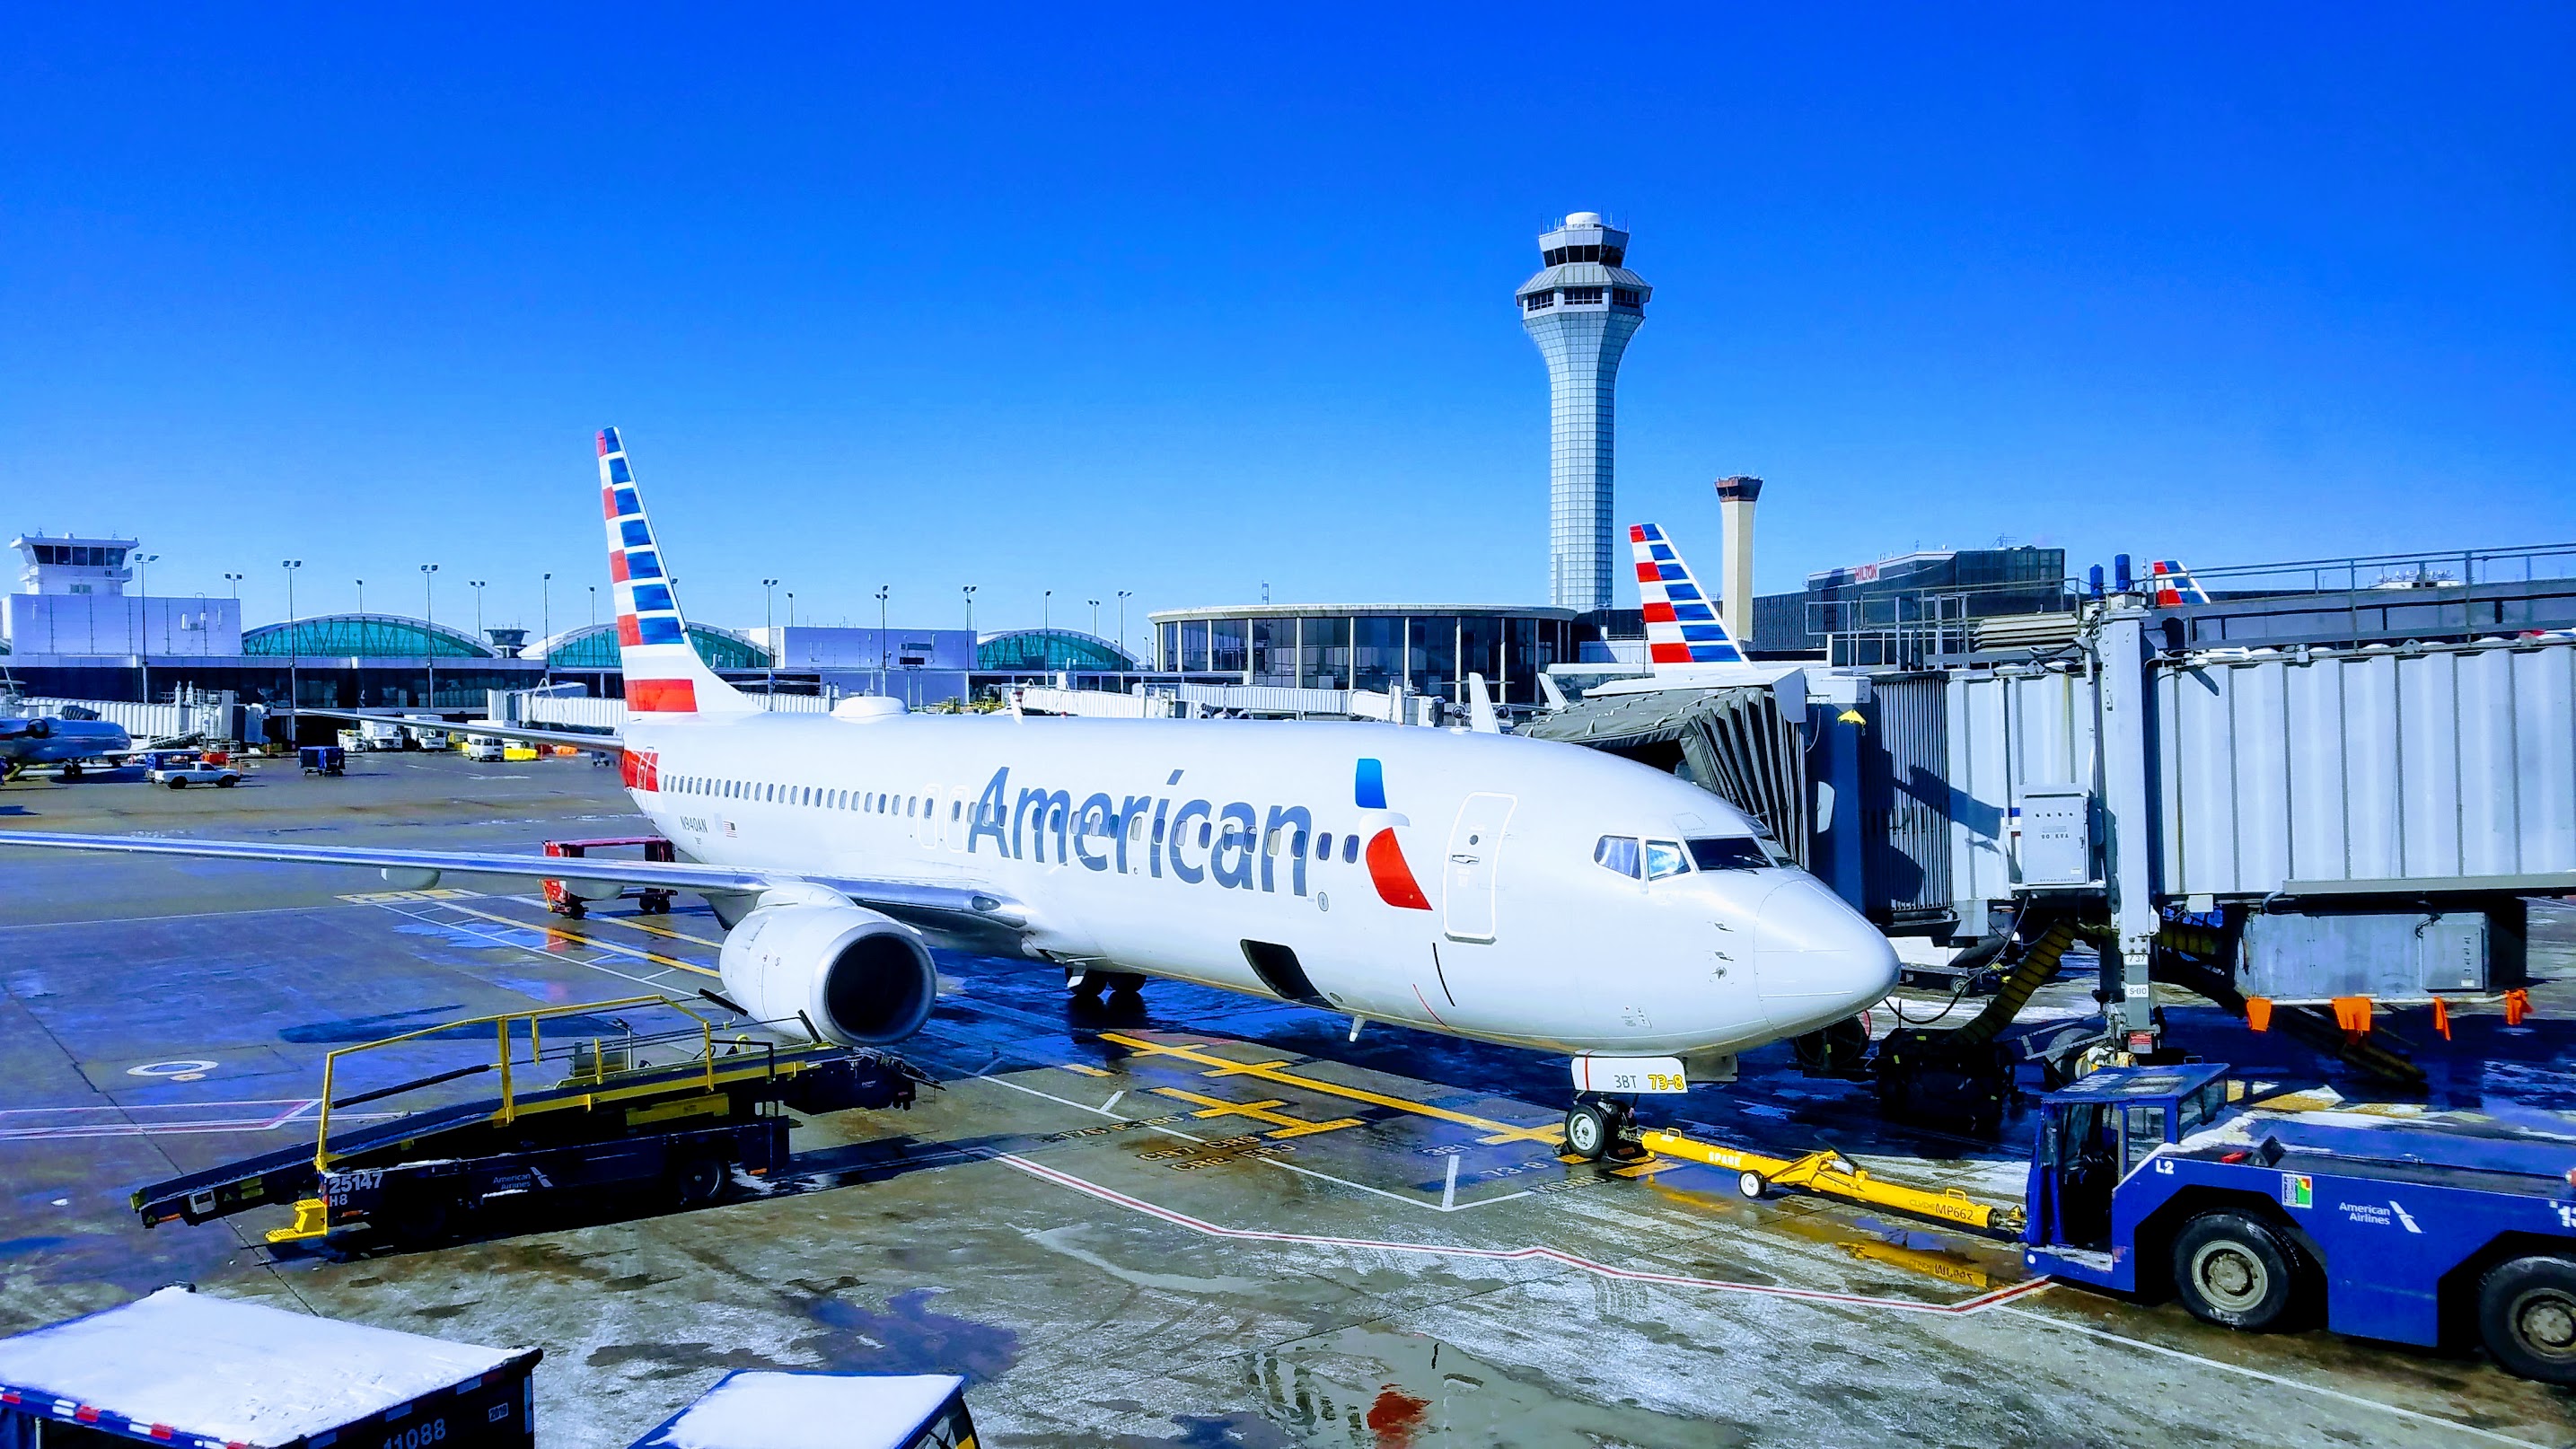 American Airlines Loses Money Flying Passengers, Profit Comes From Selling Miles